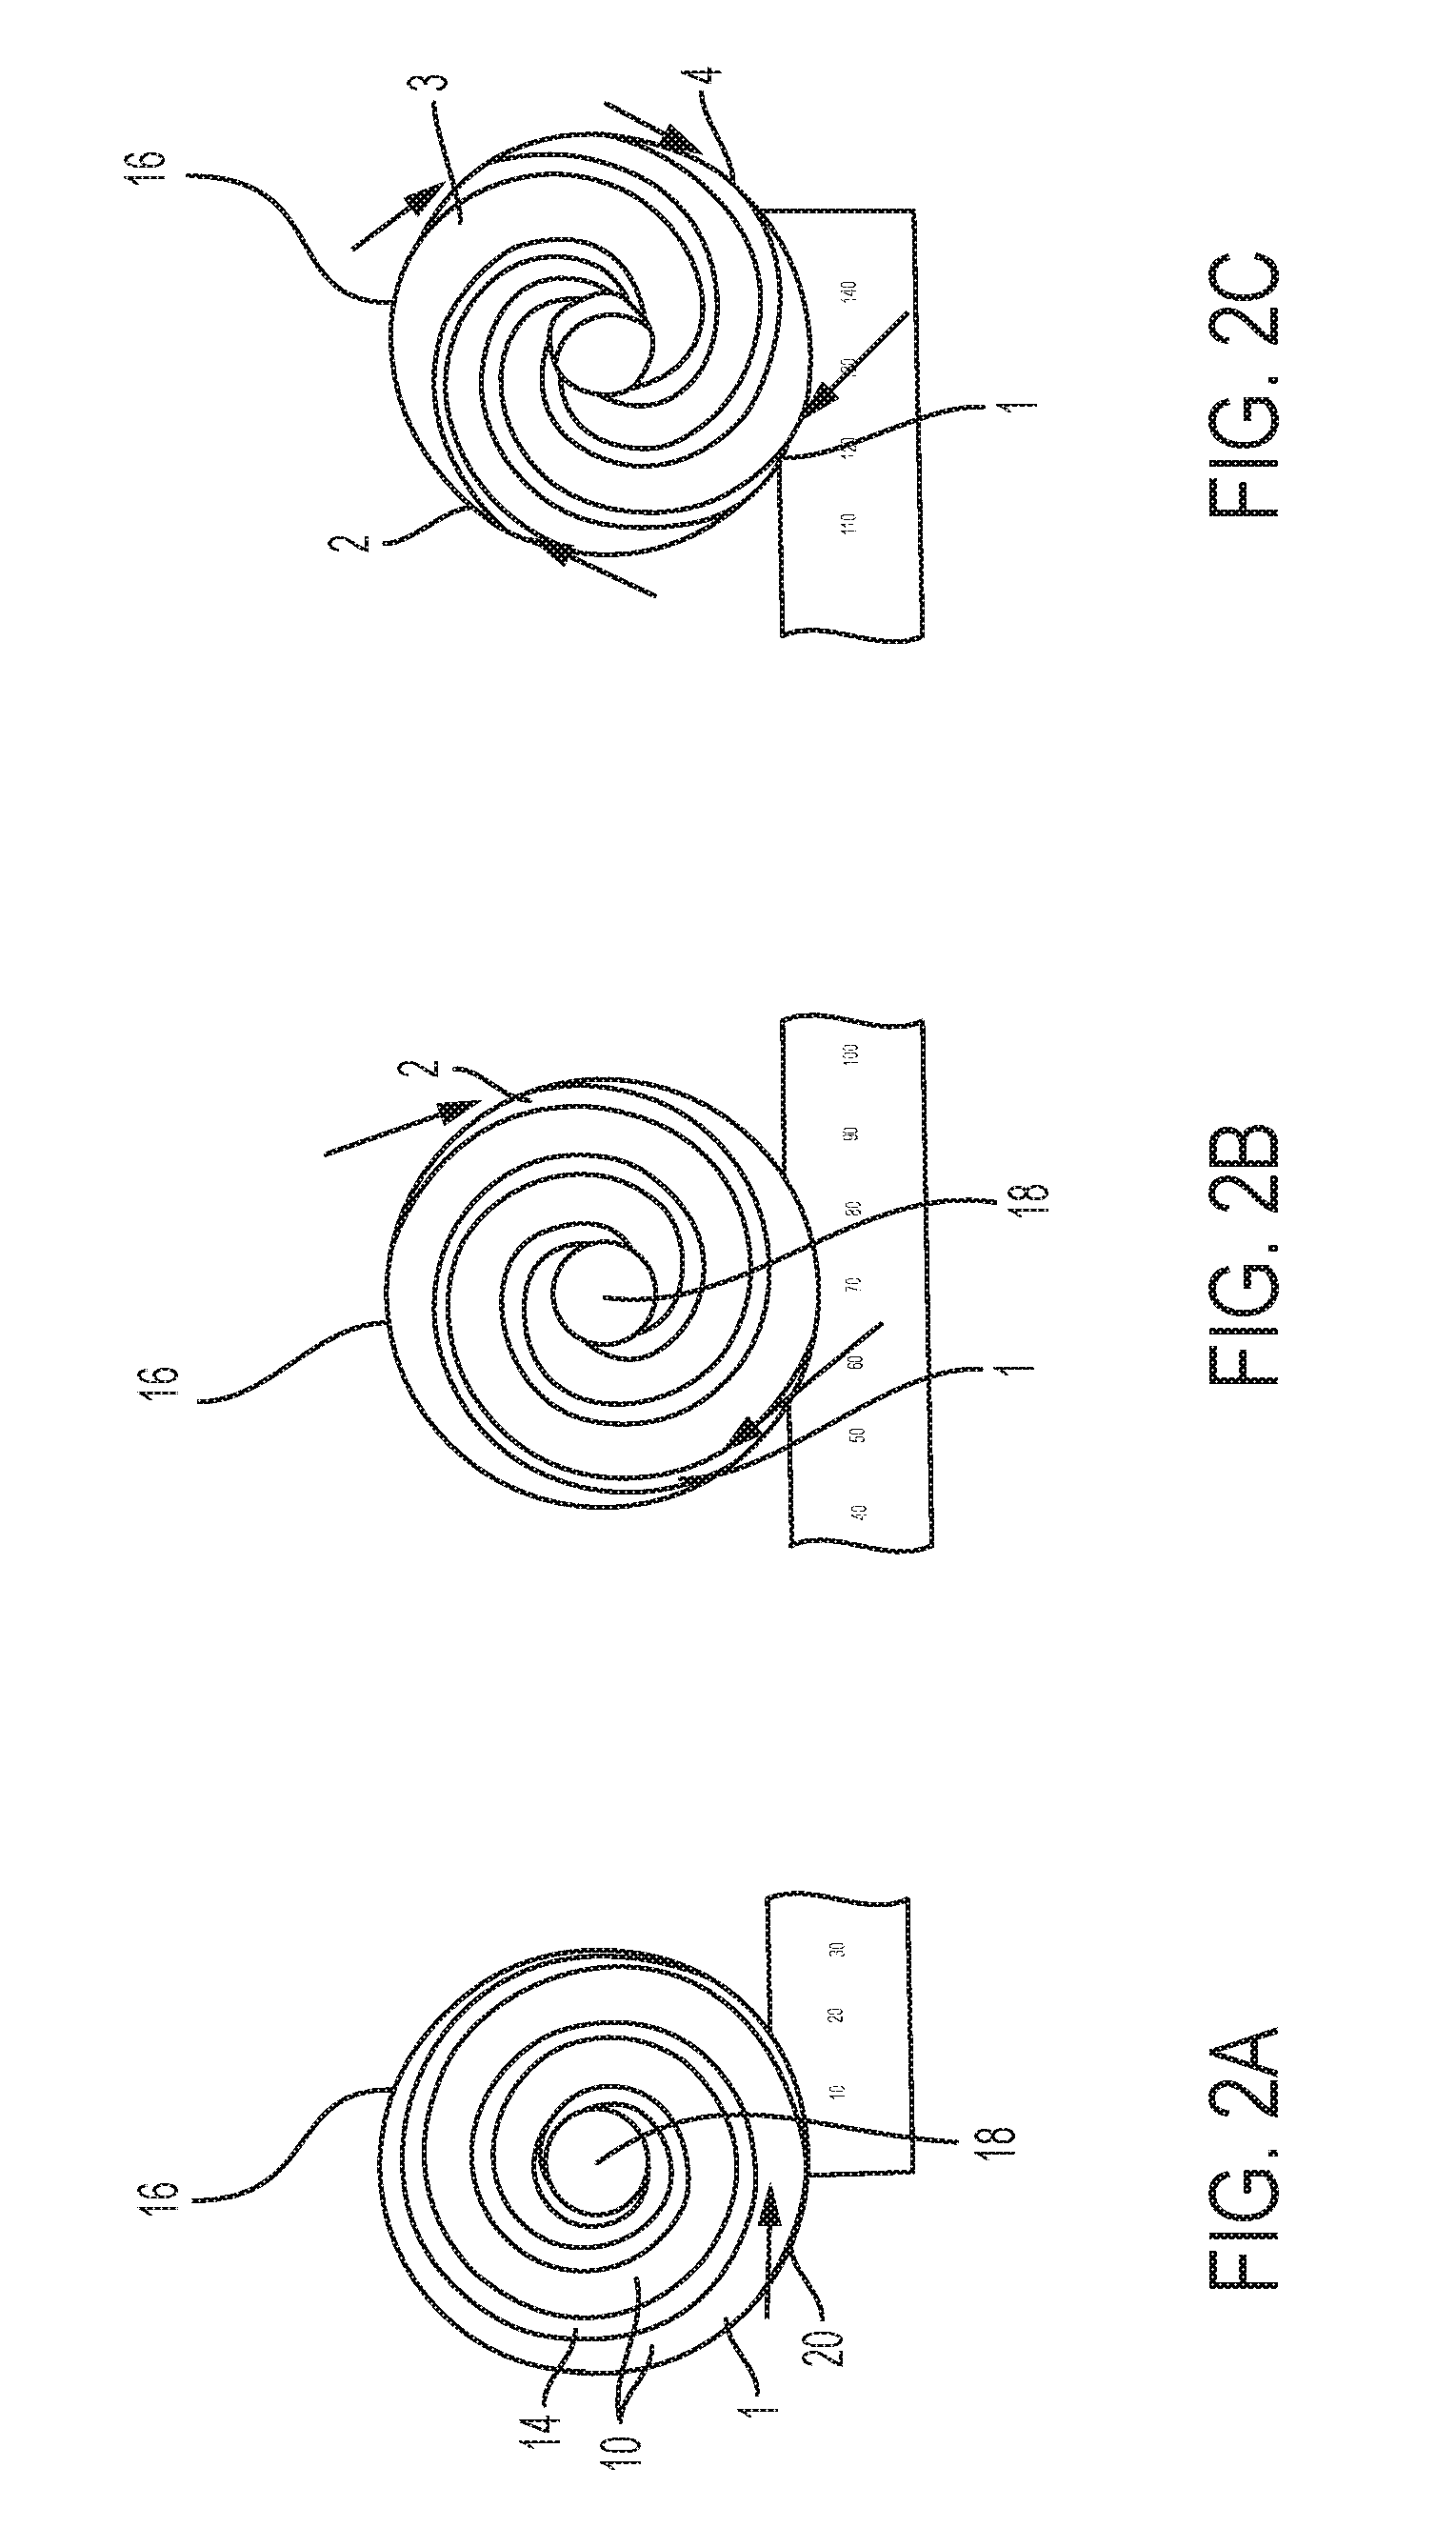 System and process for formation of extrusion products